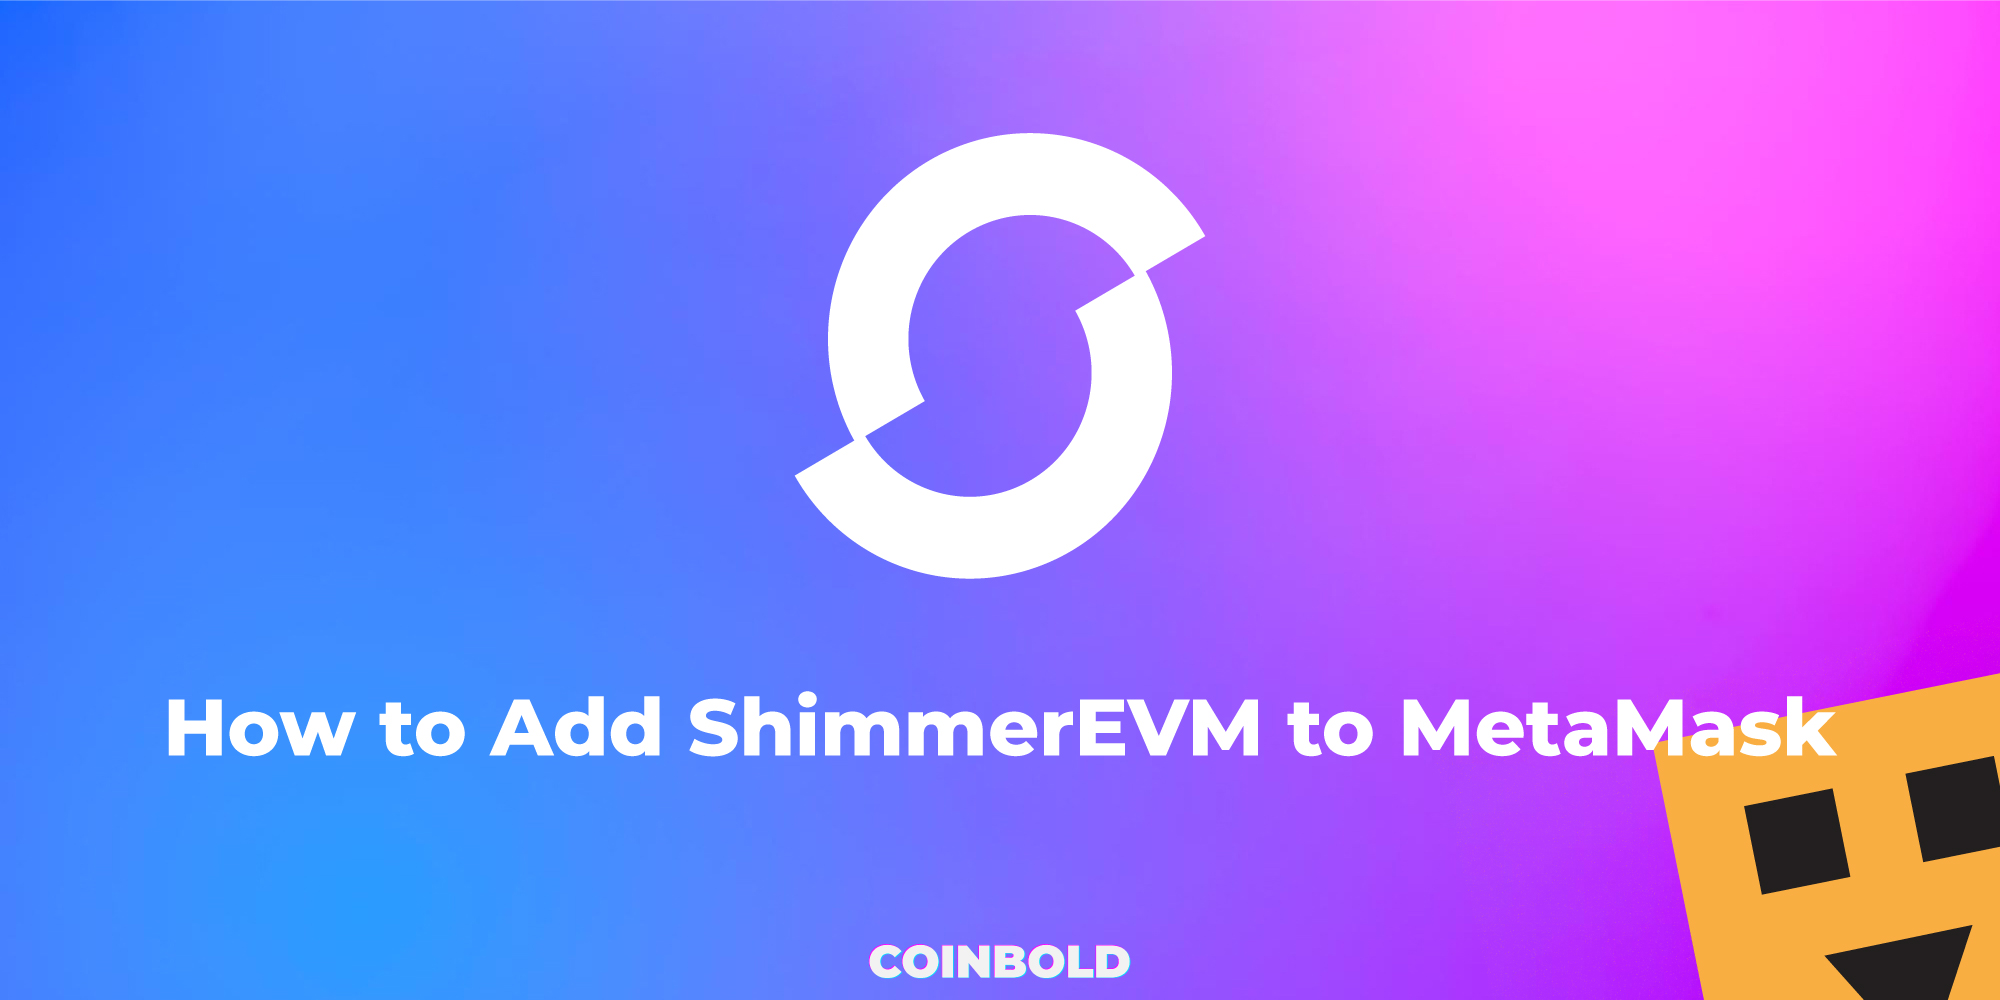 How to Add ShimmerEVM to MetaMask